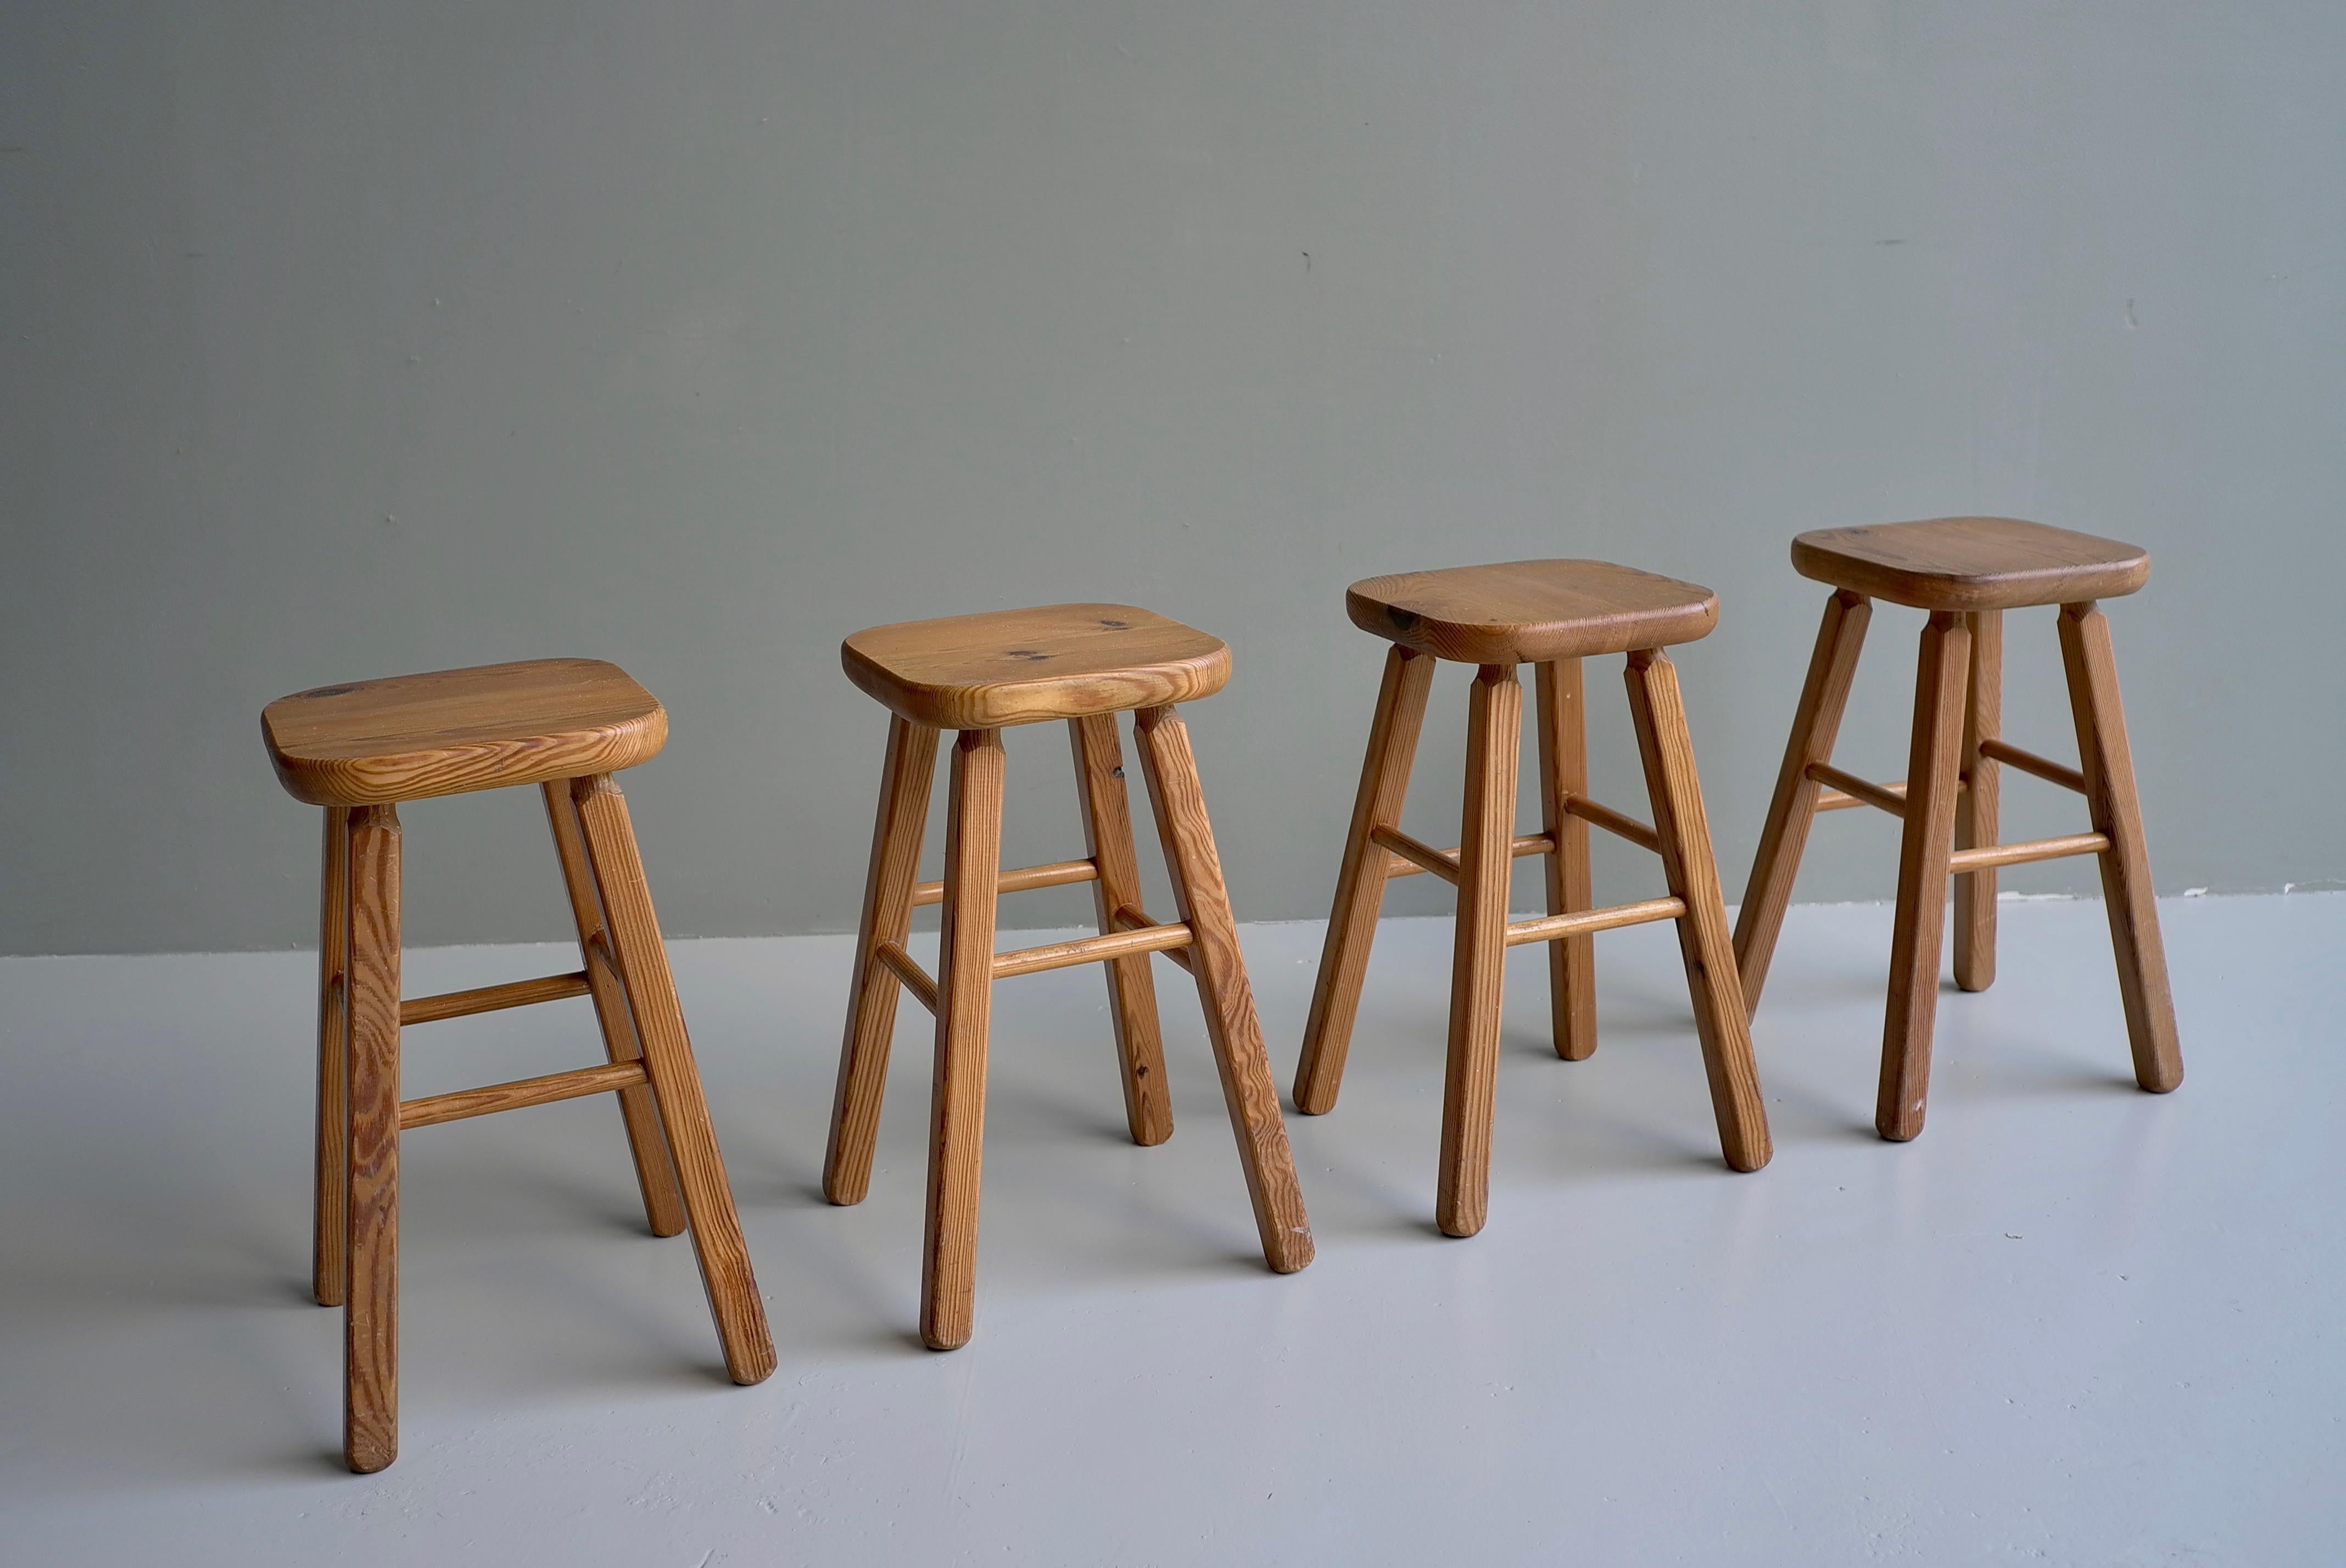 Mid-20th Century Solid Pine Stools in style of Charlotte Perriand, France 1960's For Sale